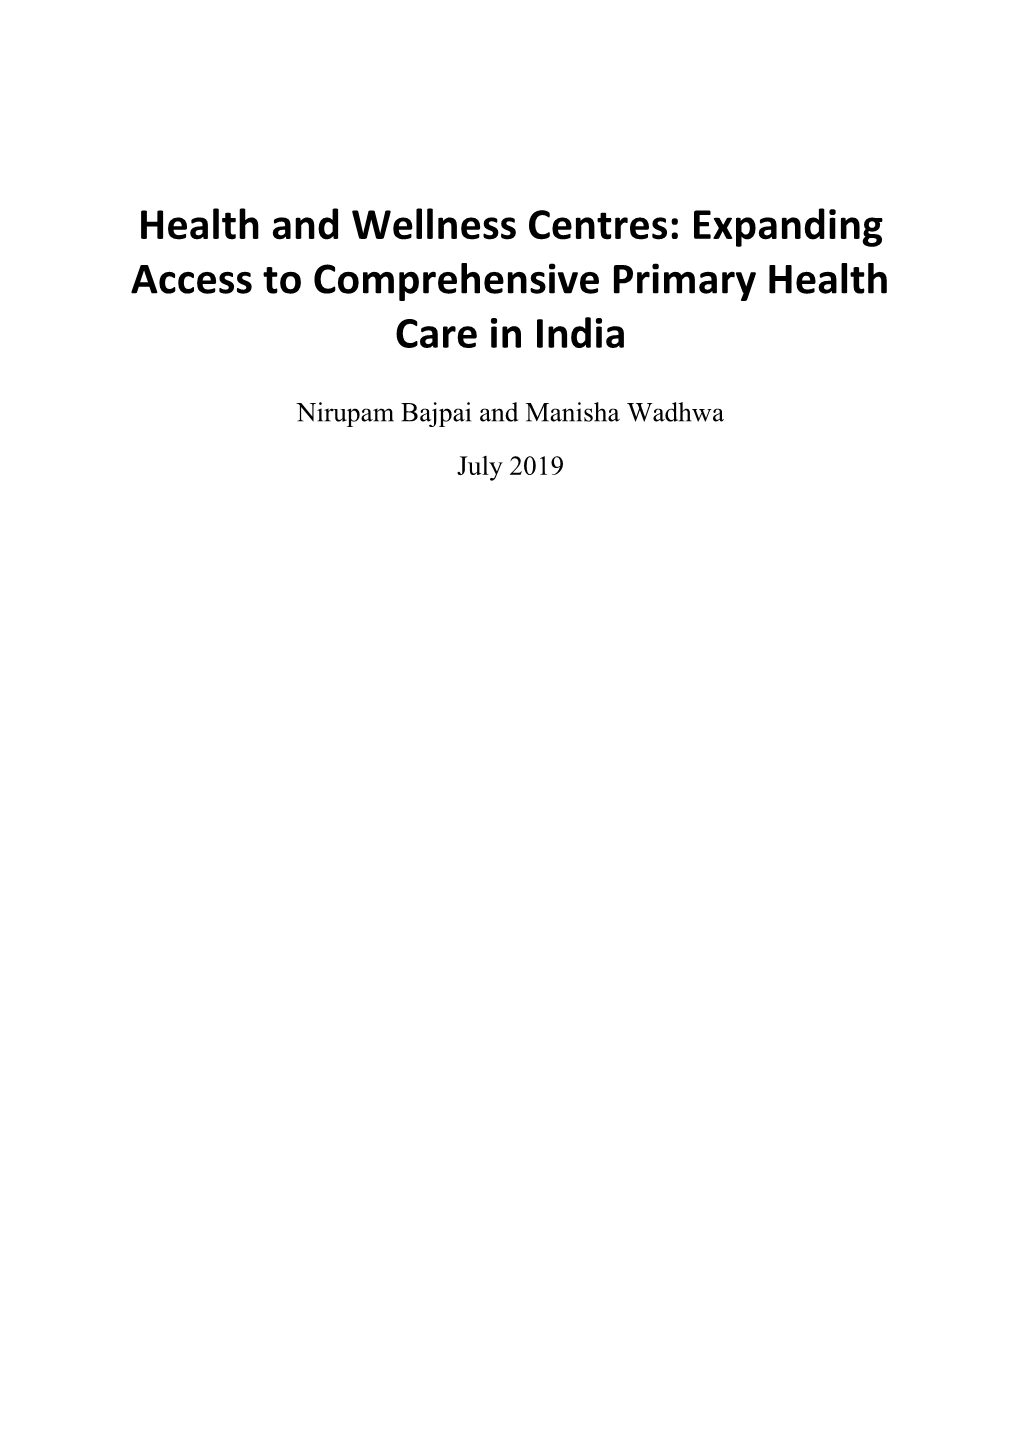 Health and Wellness Centres: Expanding Access to Comprehensive Primary Health Care in India